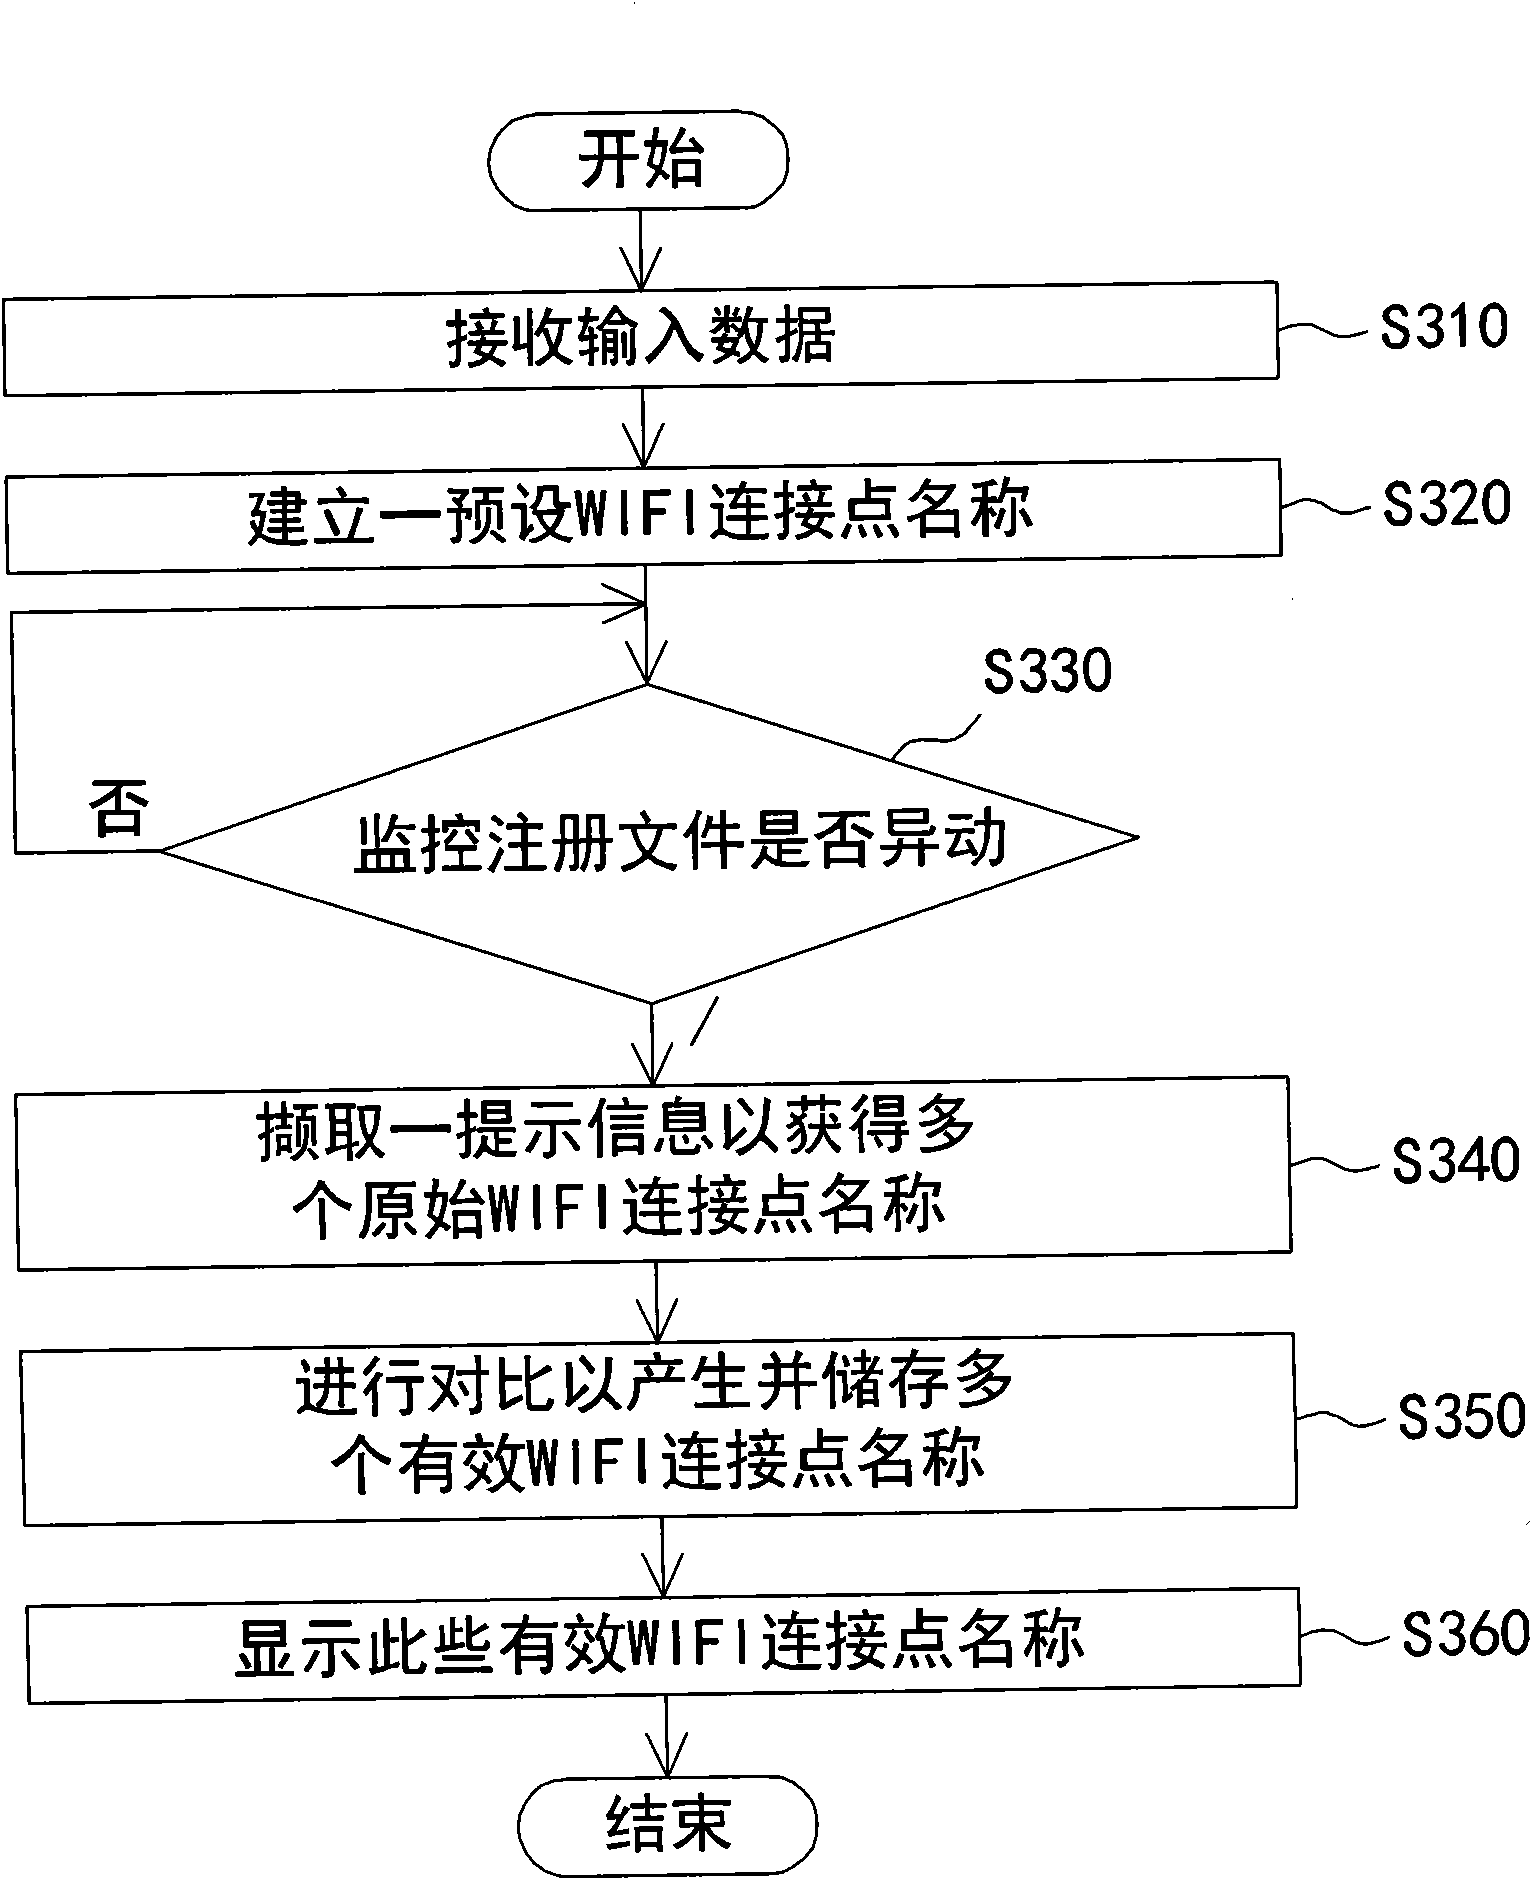 Method for displaying wireless fidelity accessing point names and wireless communication device